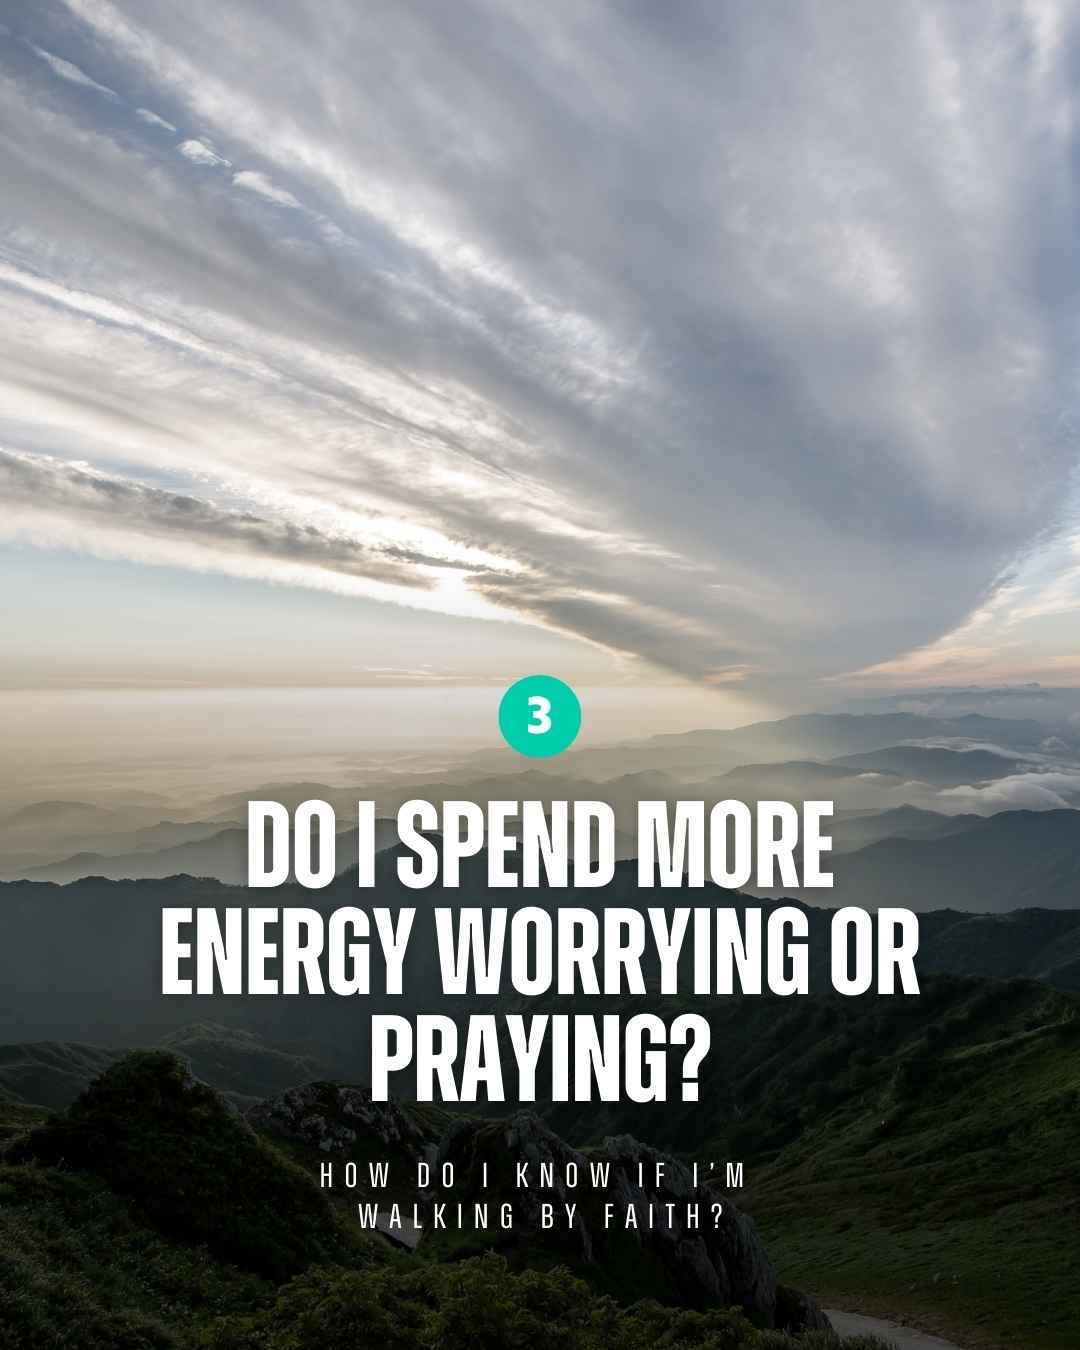 Walk by faith - Do I spend more energy worrying or praying?